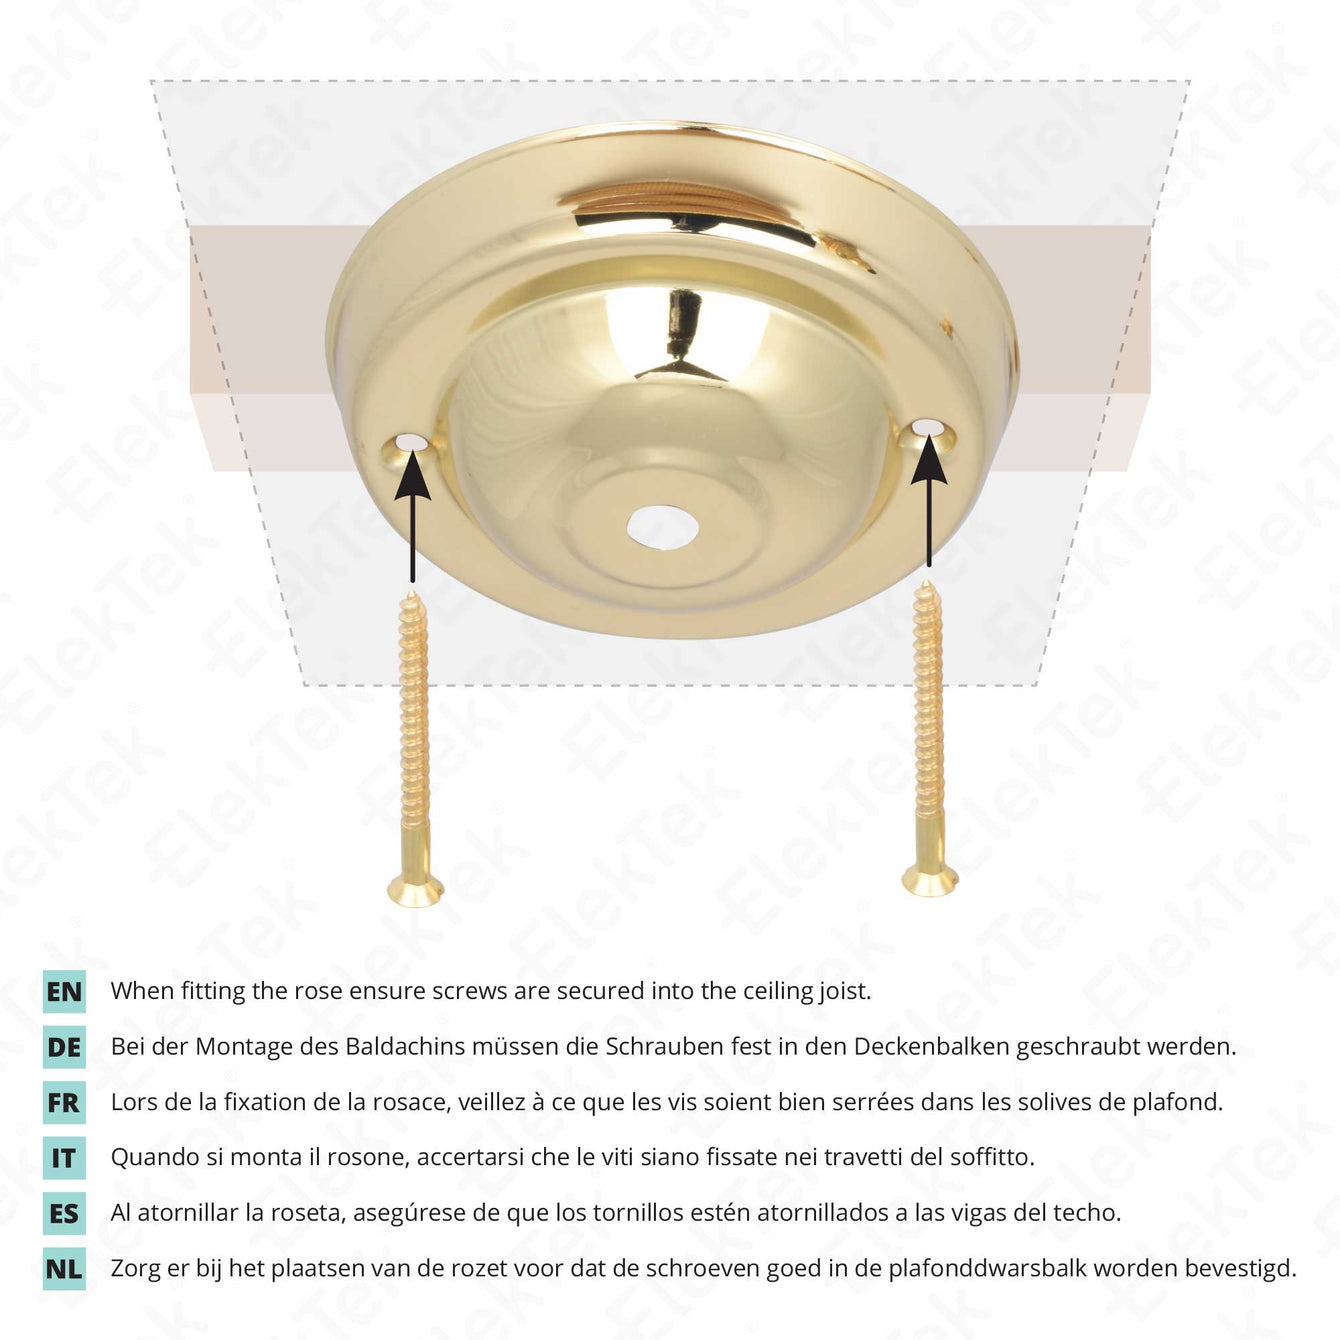 ElekTek 108mm Diameter Ceiling Rose with Cord Grip Metallic Finishes Powder Coated Colours For Light Fittings and Chandeliers Fusion Bronze